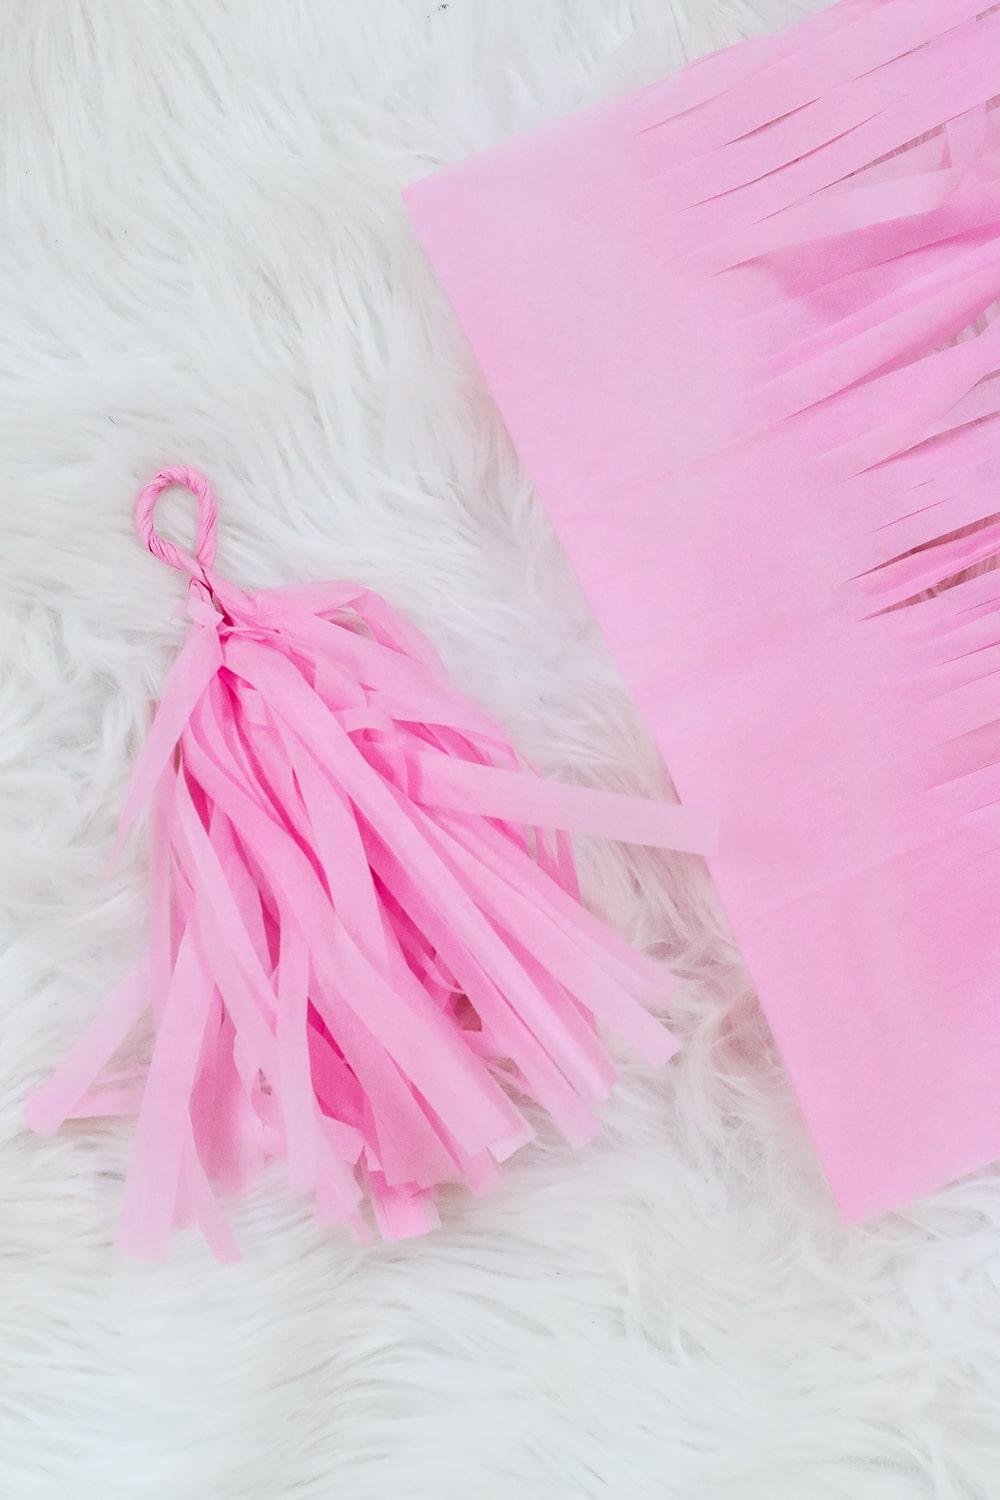 DIY blogger Stephanie Ziajka of Diary of a Debutante shows how to create a loop for DIY tissue tassels